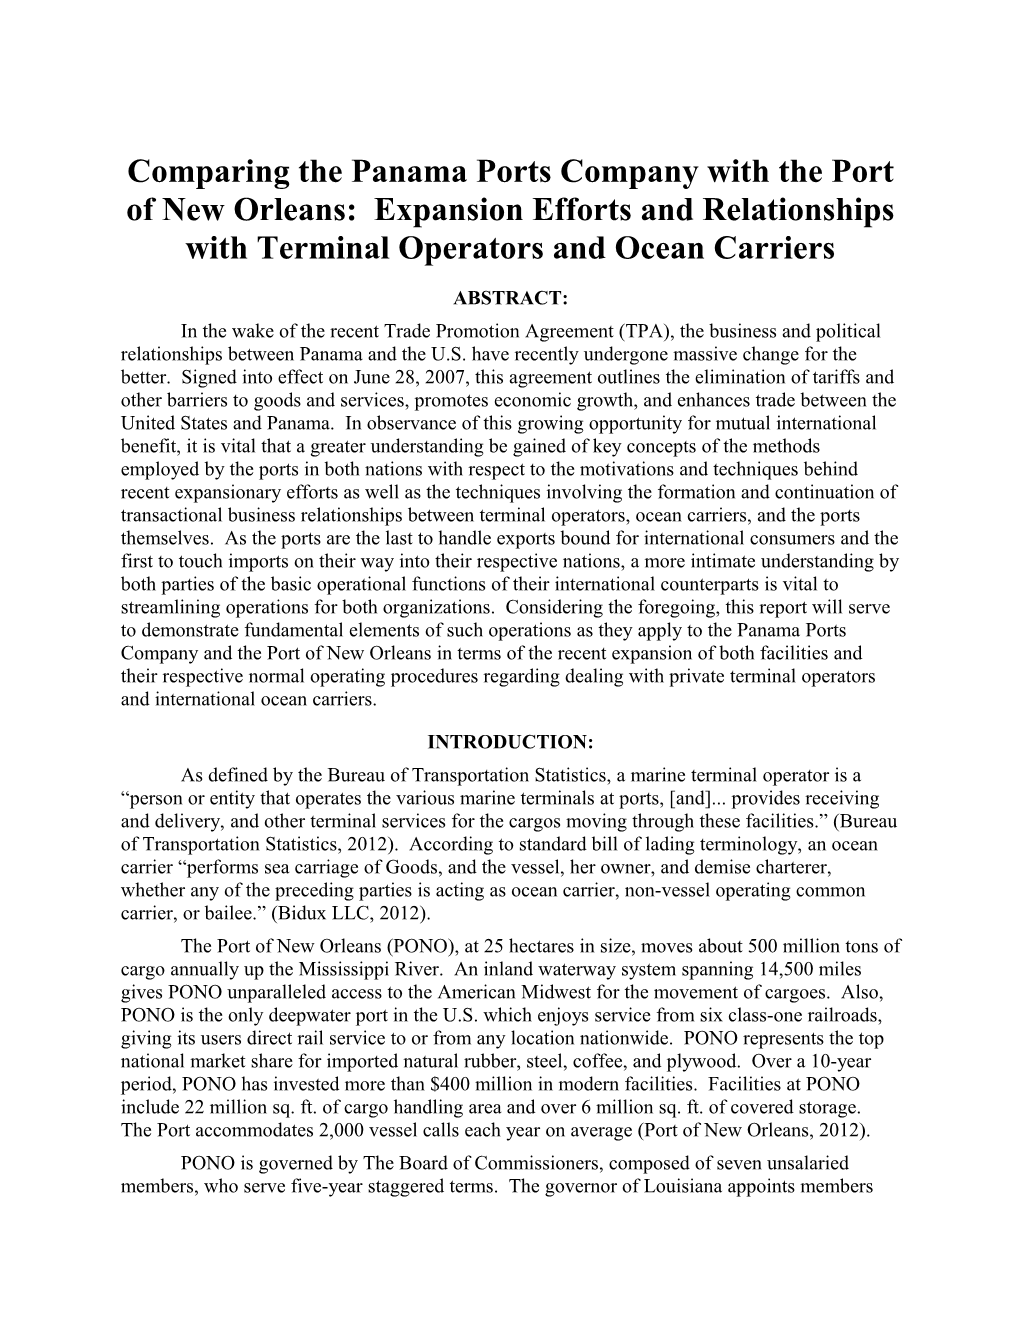 Comparing the Panama Ports Company with the Port of New Orleans: Expansion Efforts And